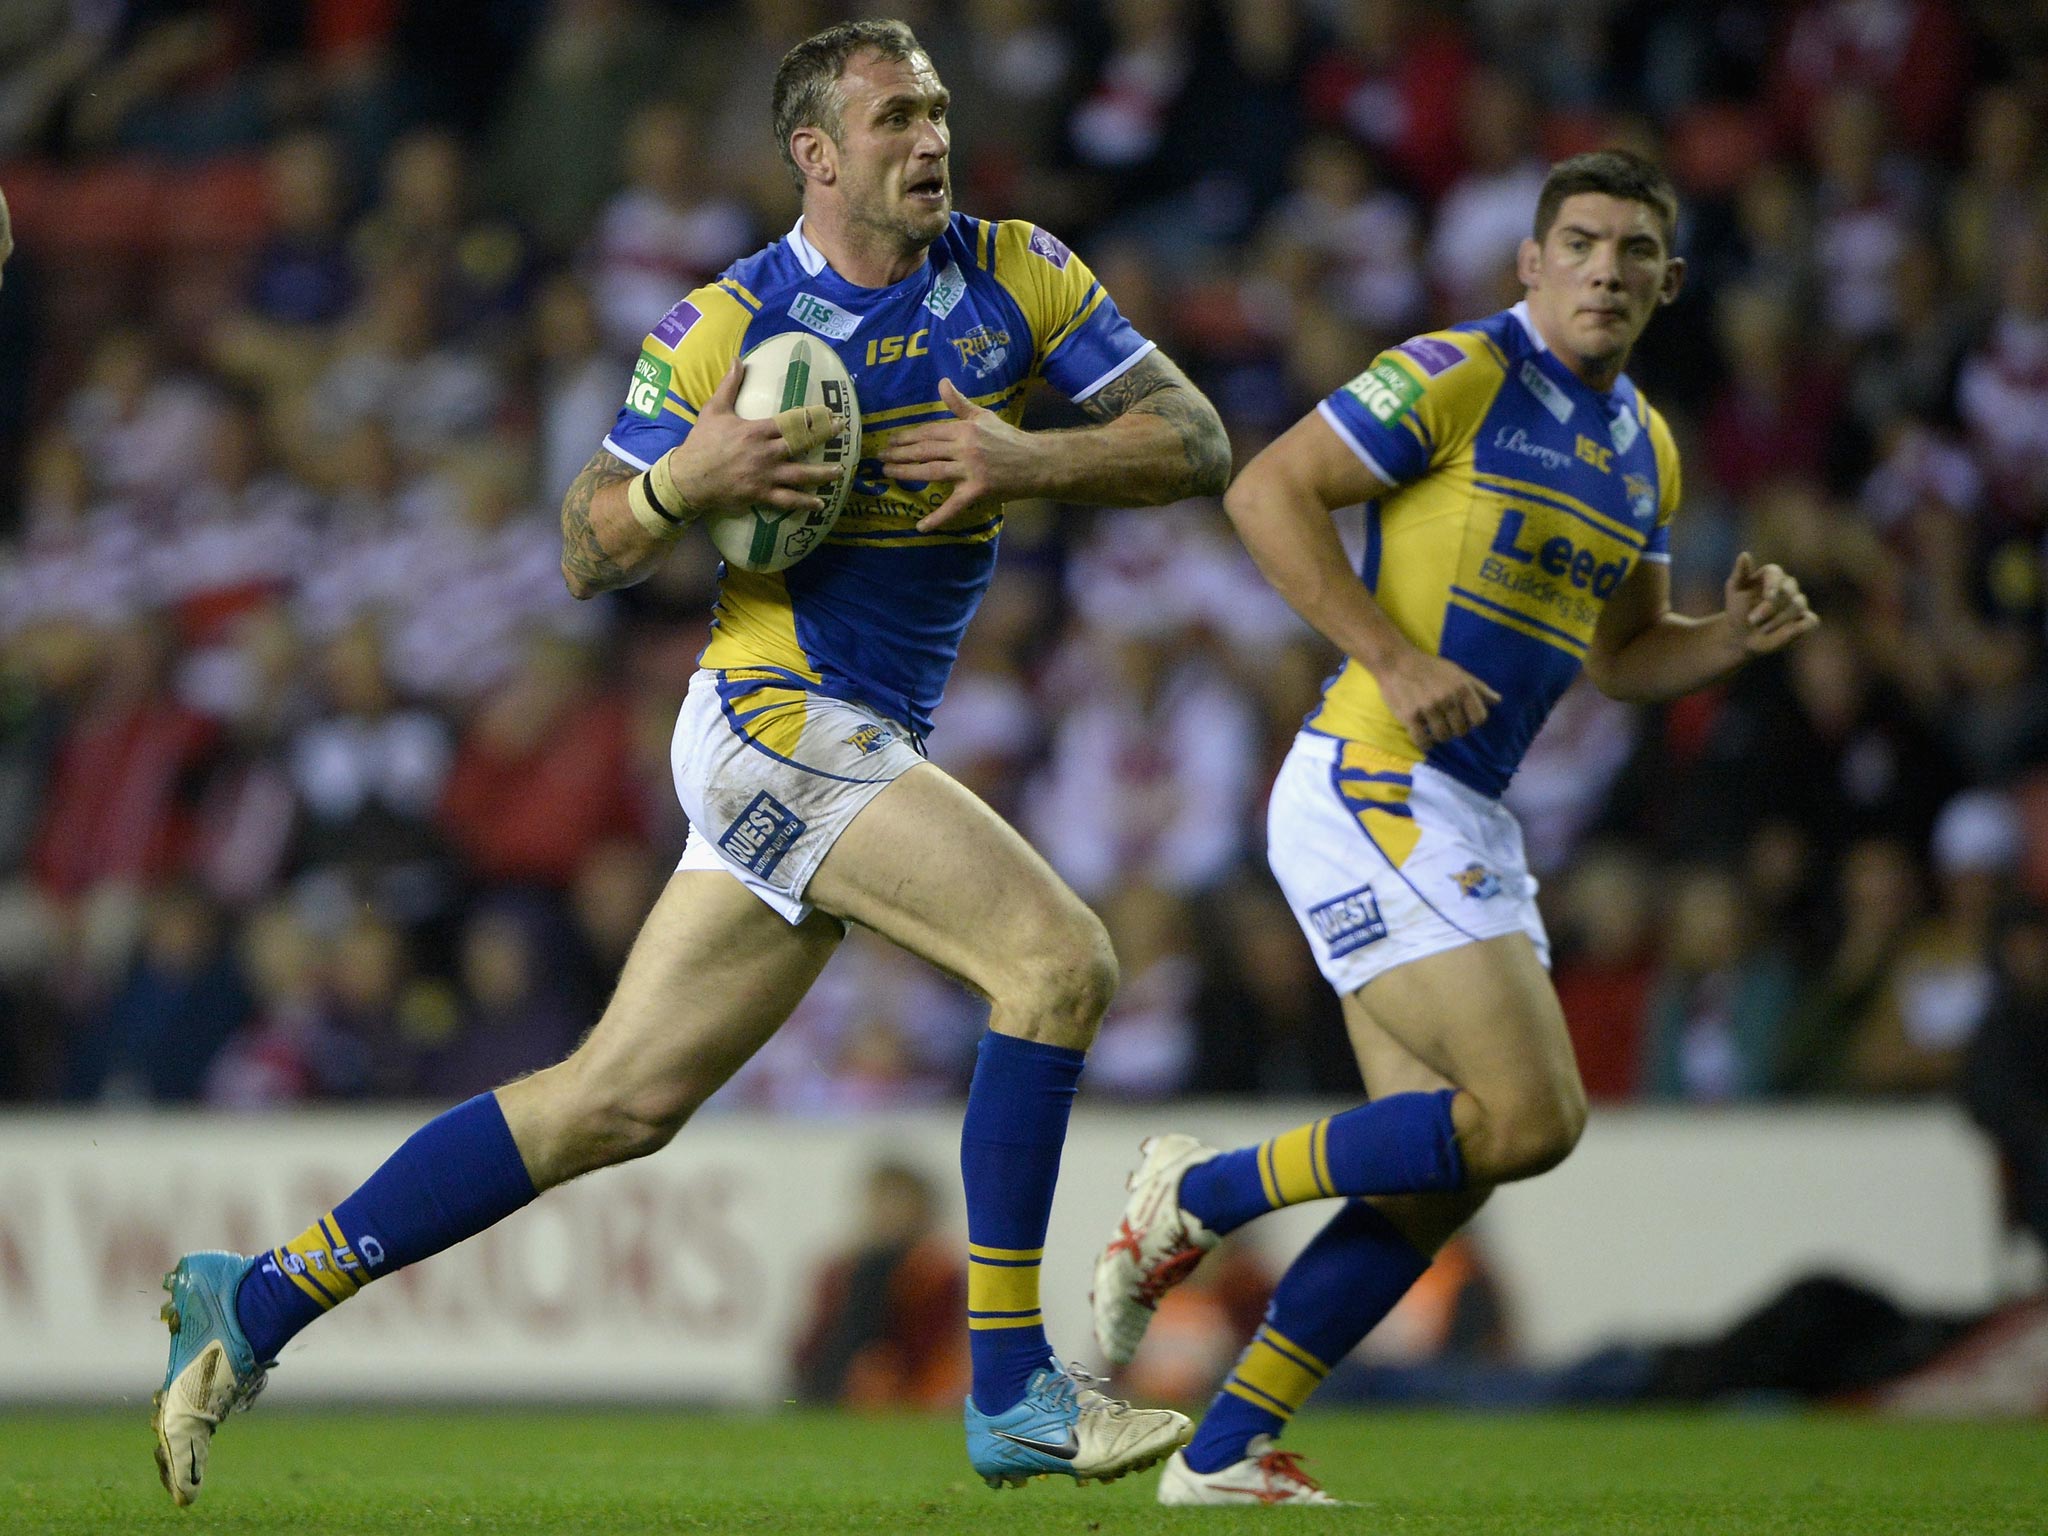 Jamie Peacock will make his 500th Super League appearance on Friday when he plays for Leeds Rhinos against Wakefield